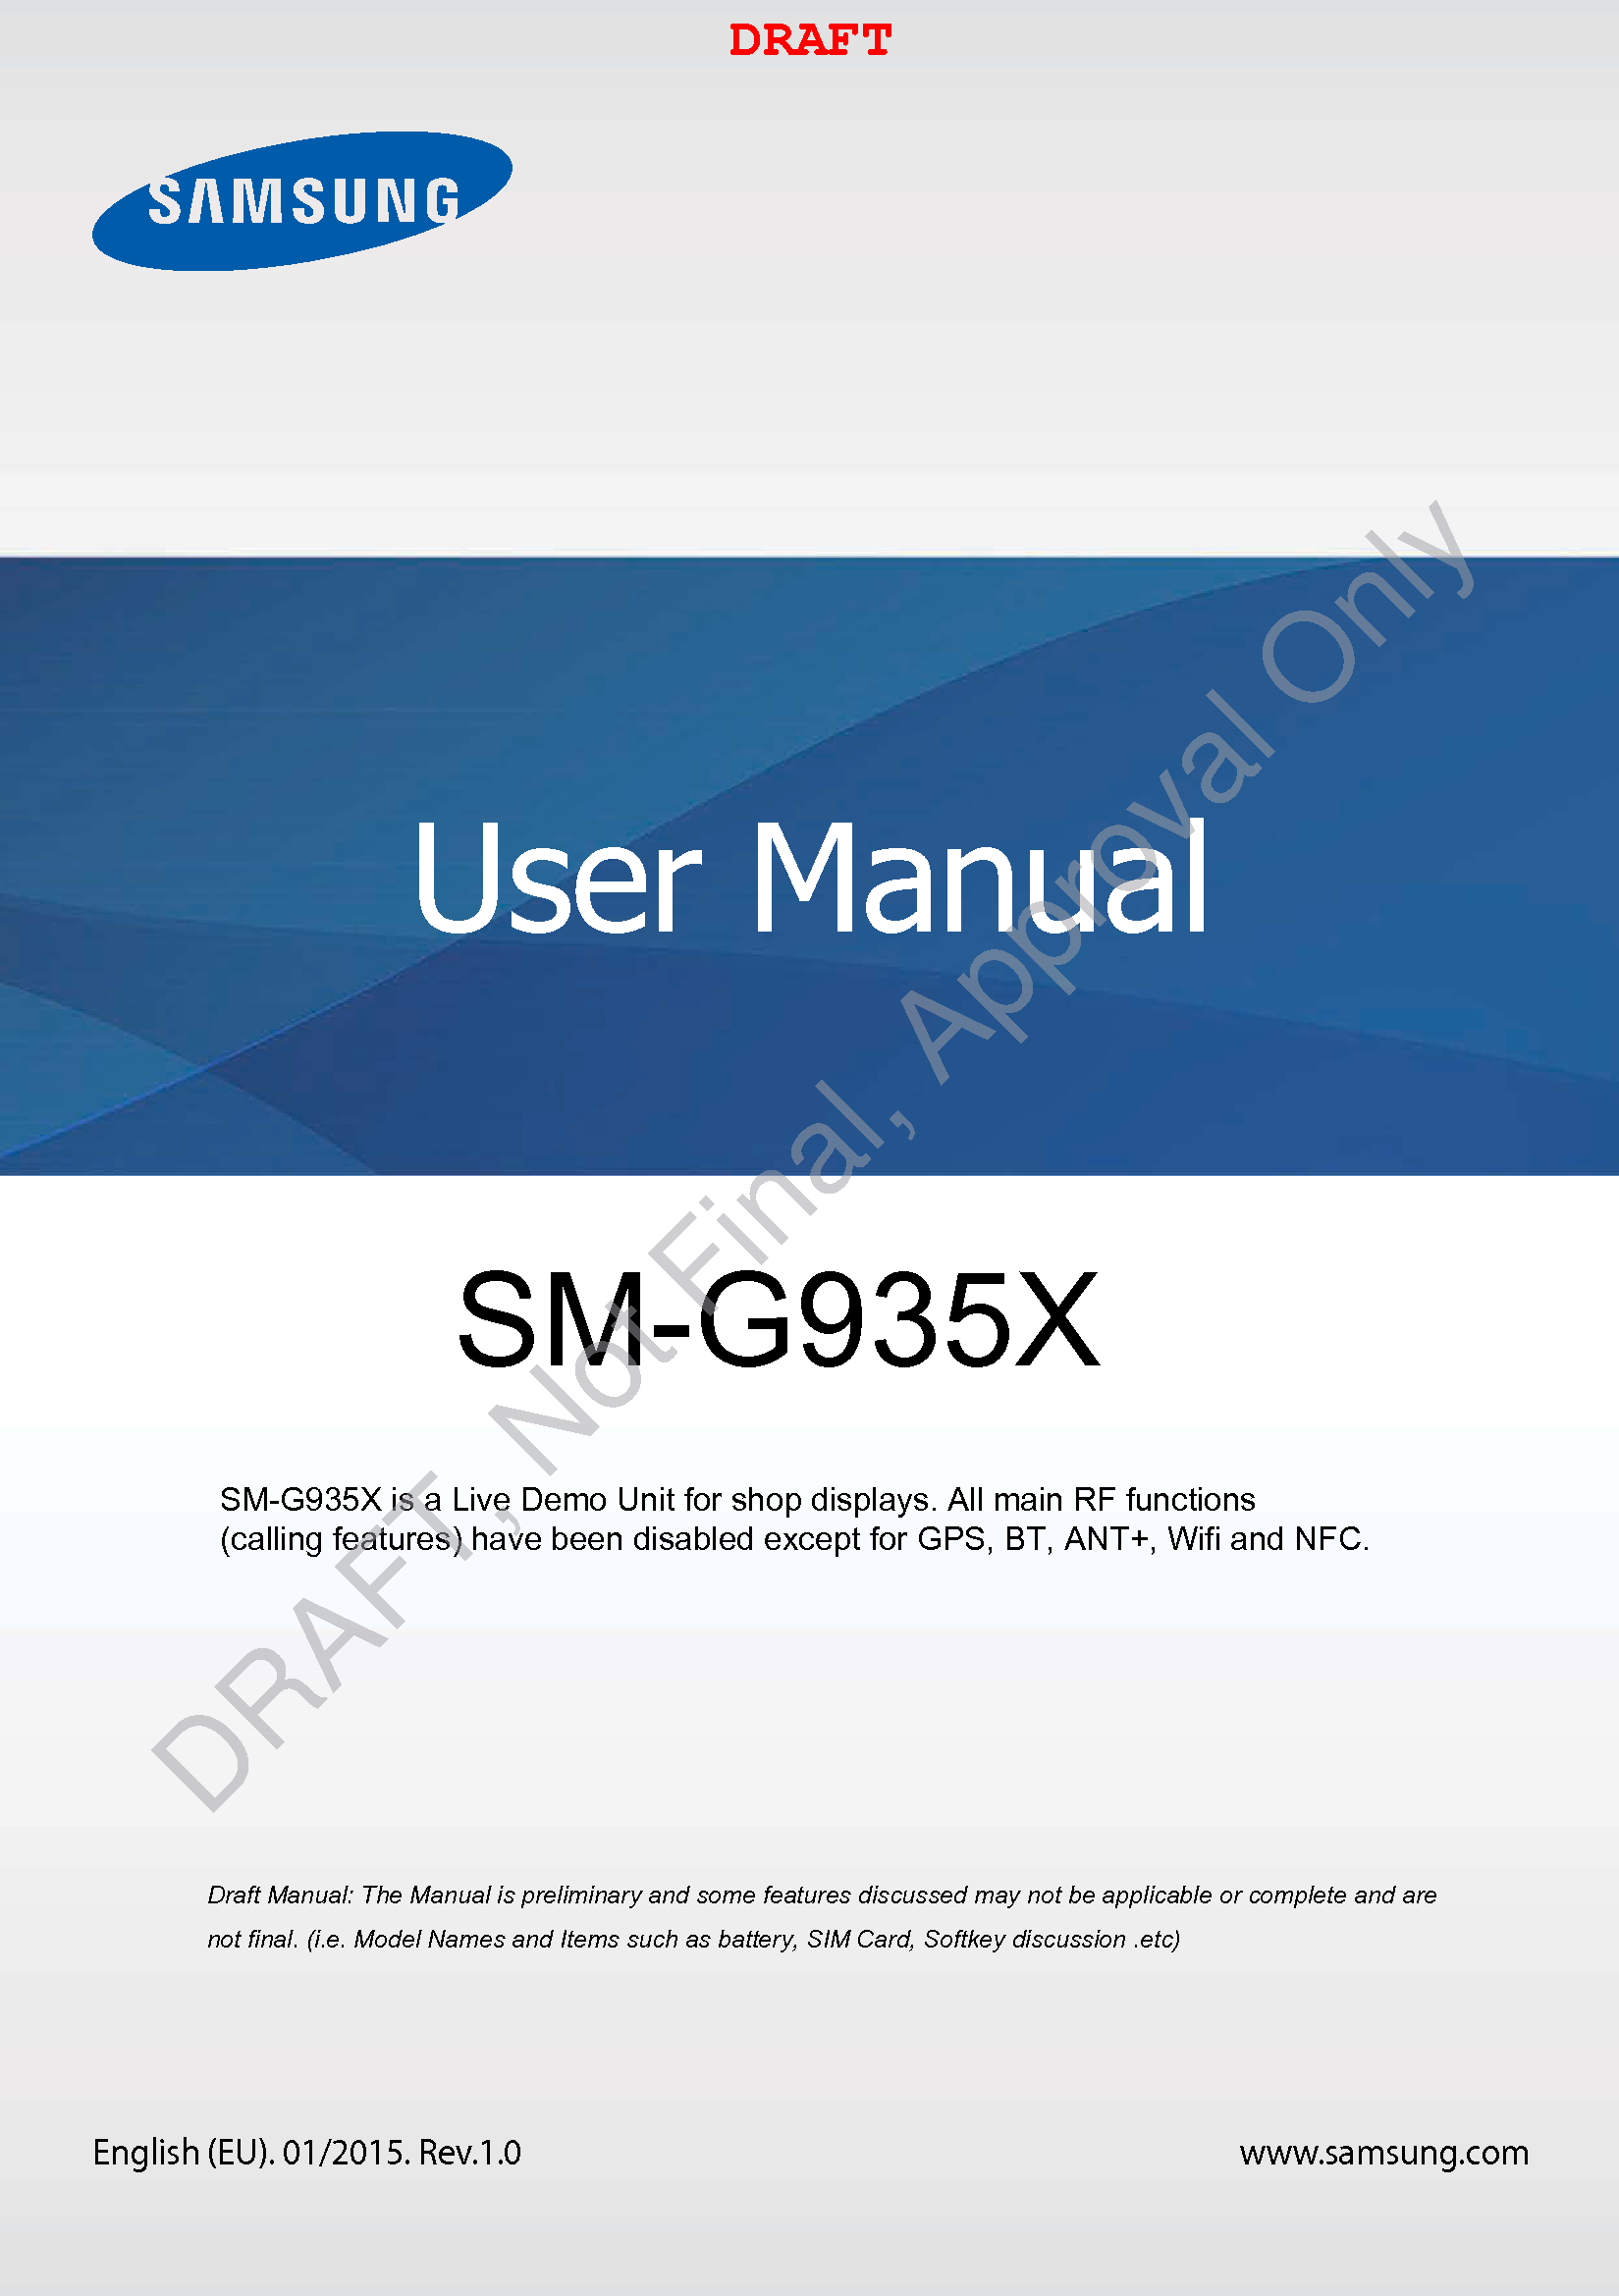 www.samsung.comUser ManualEnglish (EU). 01/2015. Rev.1.0a ana  ana  na and  a dd a n  aa   and a n na  d a and   a a  ad  dn SM-G935X DRAFTSM-G935X is a Live Demo Unit for shop displays. All main RF functions (calling features) have been disabled except for GPS, BT, ANT+, Wifi and NFC.DRAFT, Not Final, Approval Only